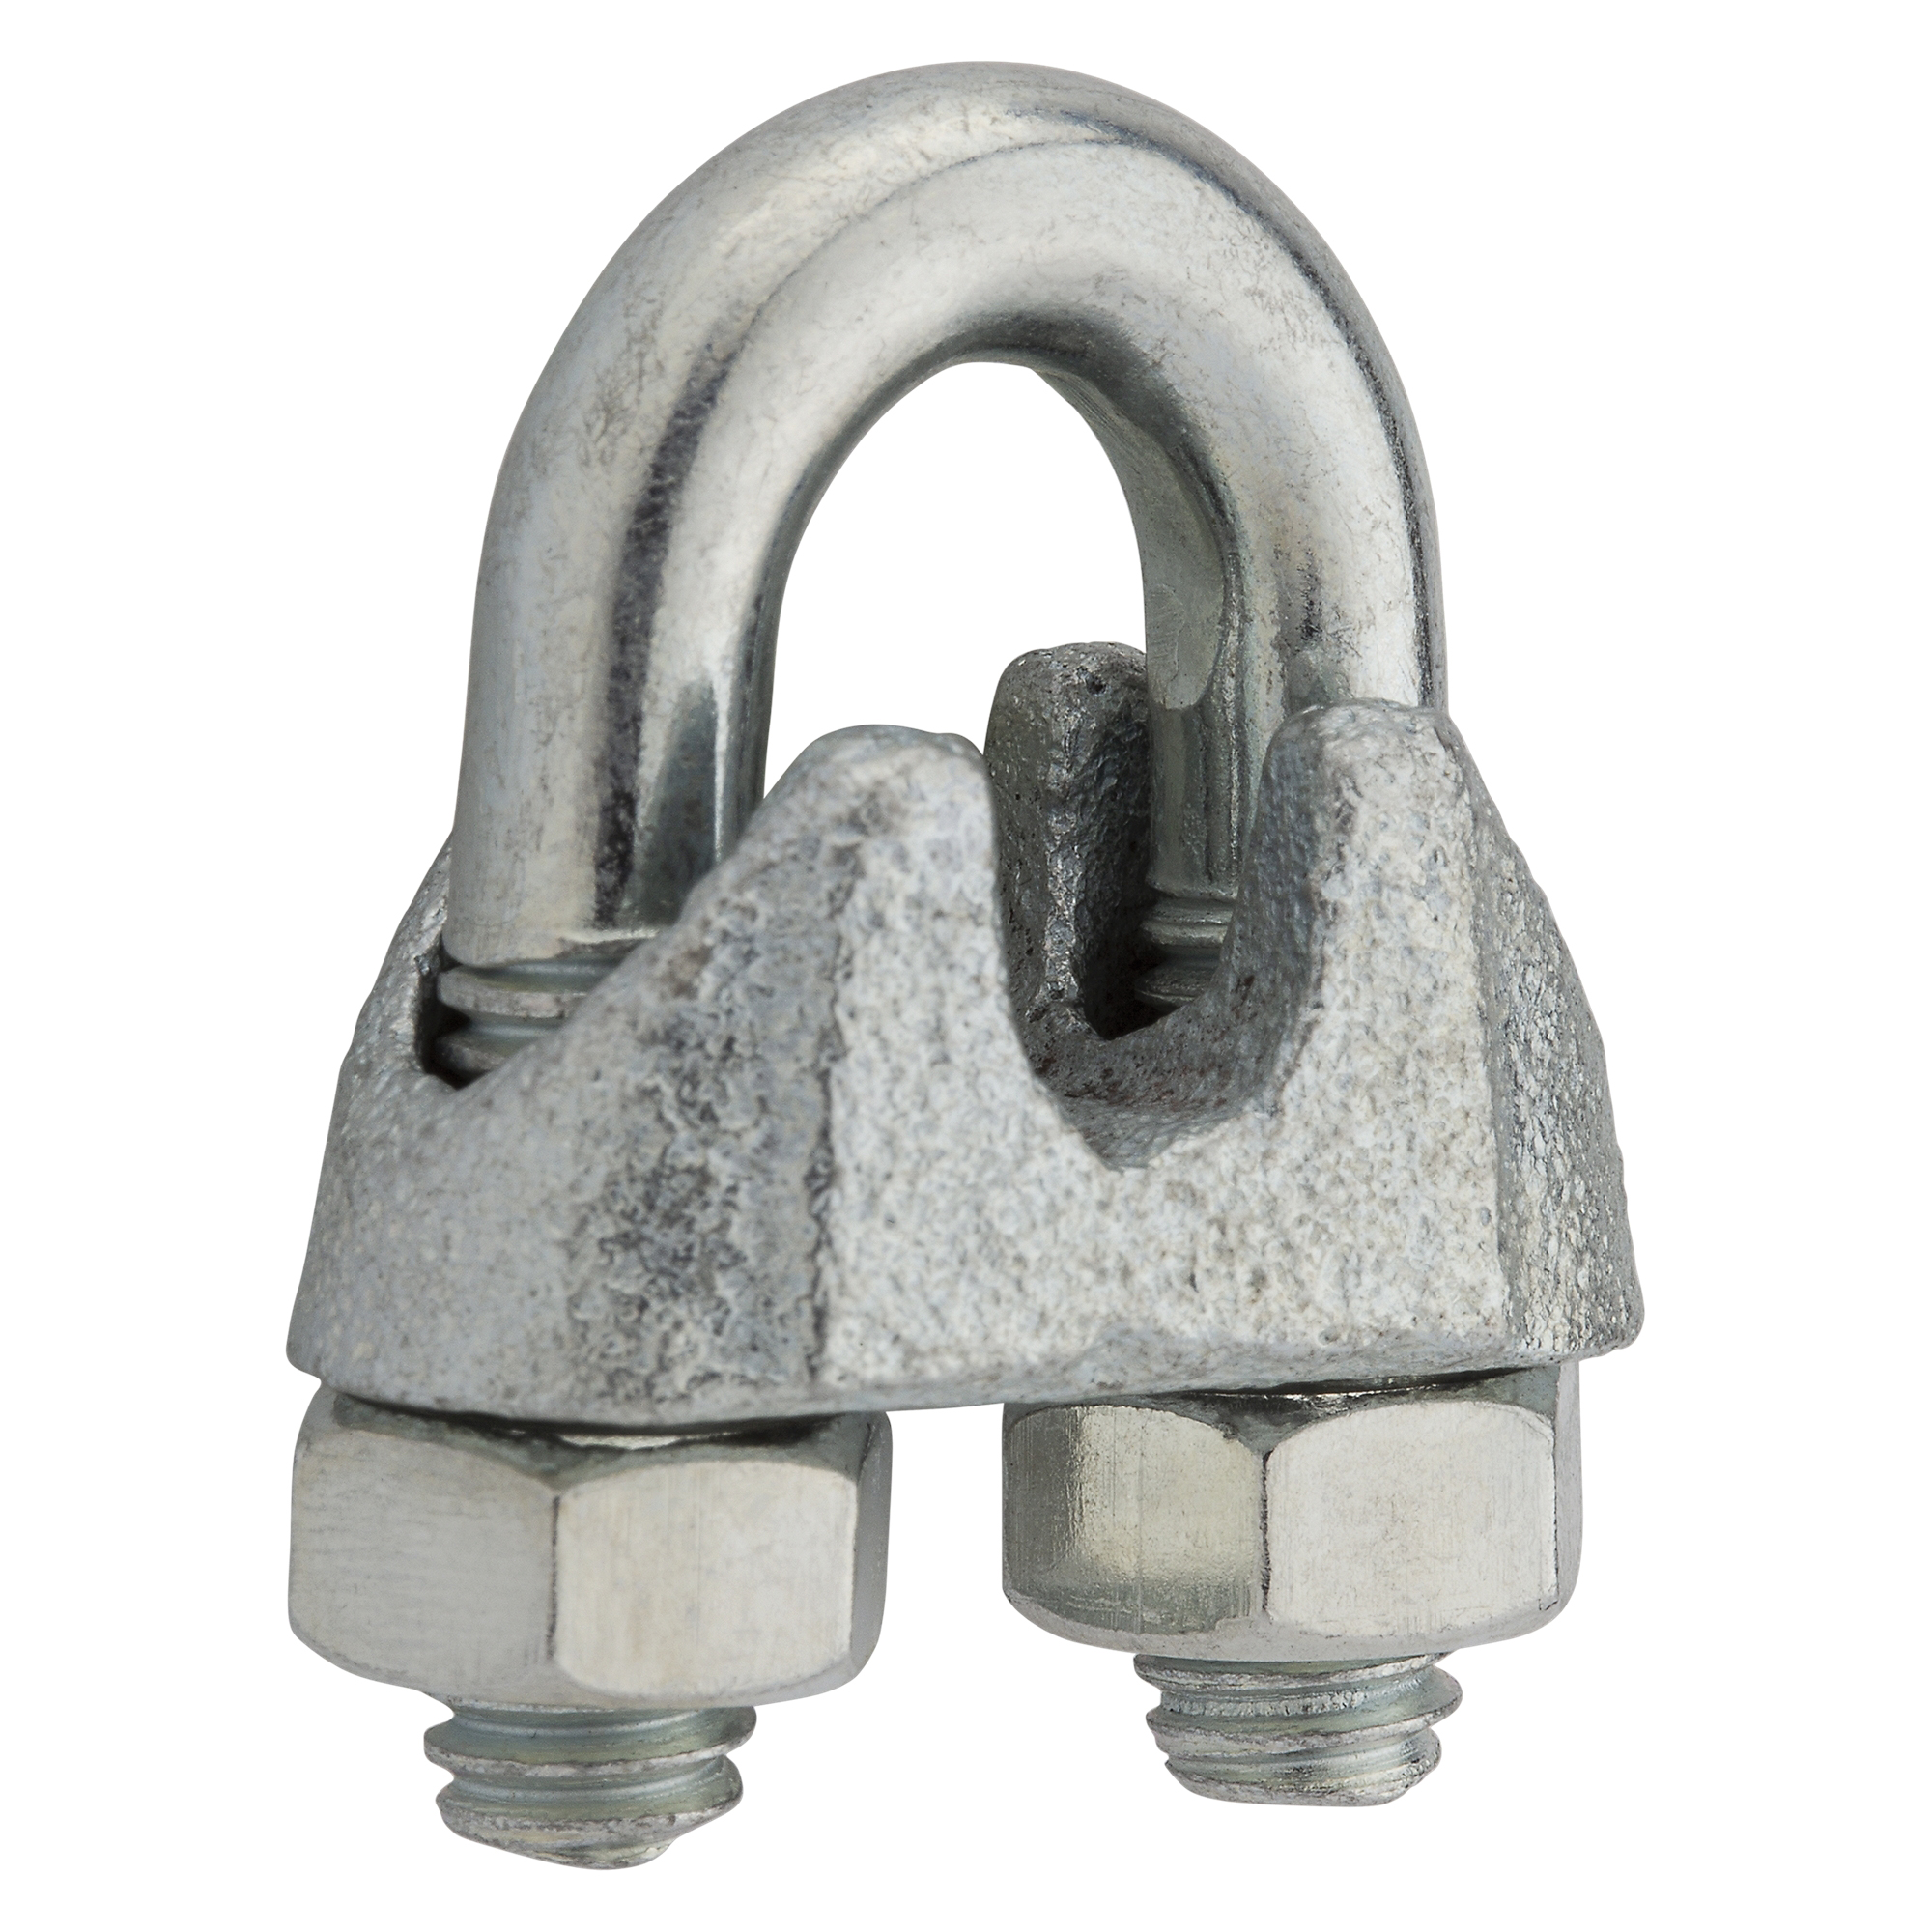 N889-015 Wire Cable Clamp, 1/4 in Dia Cable, 1-7/32 in L, Malleable Iron/Steel